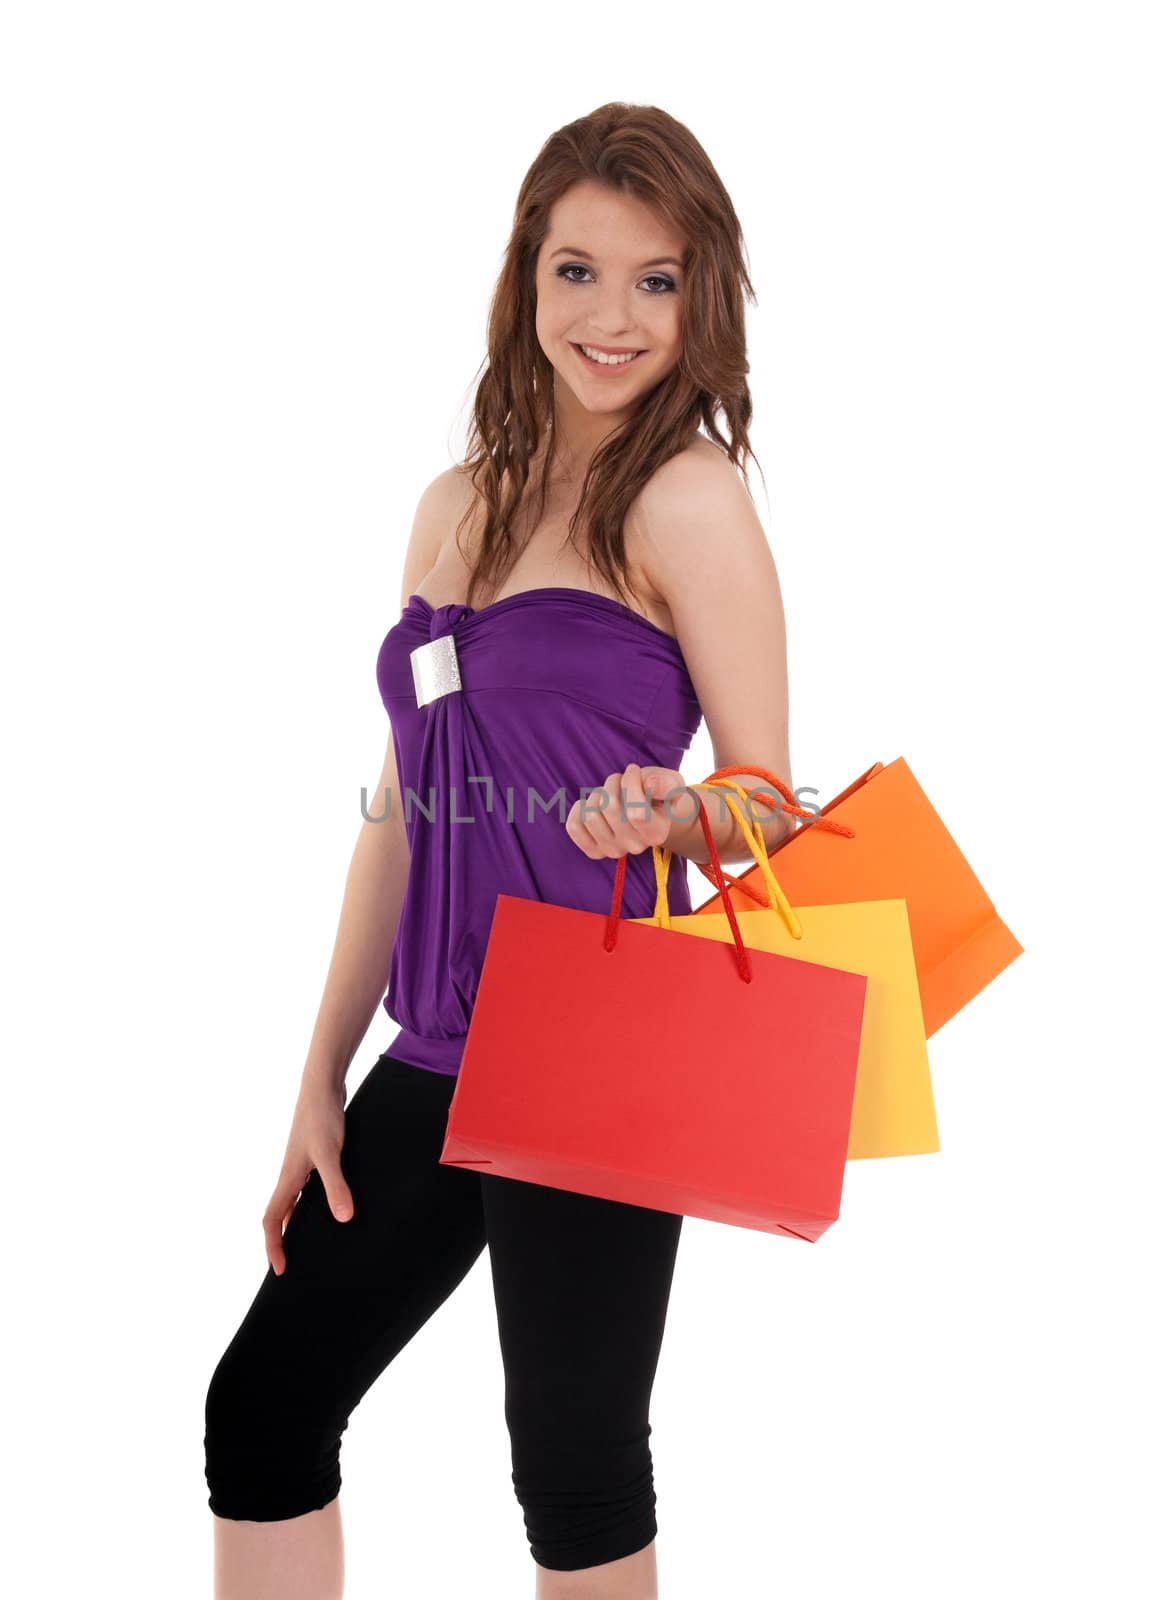 Smiling girl with colorful shopping bags by anikasalsera